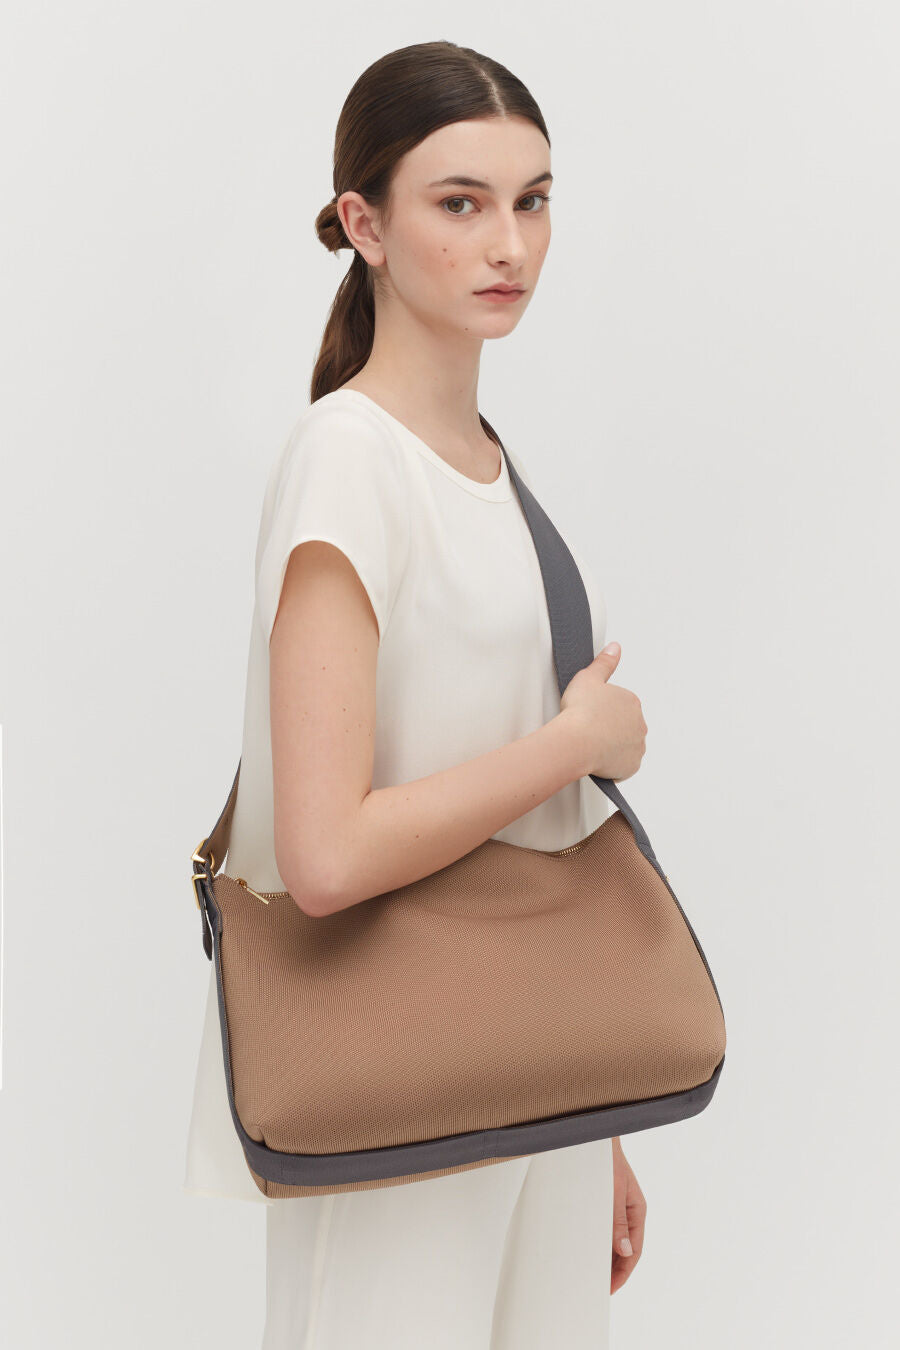 Woman standing with a large shoulder bag.